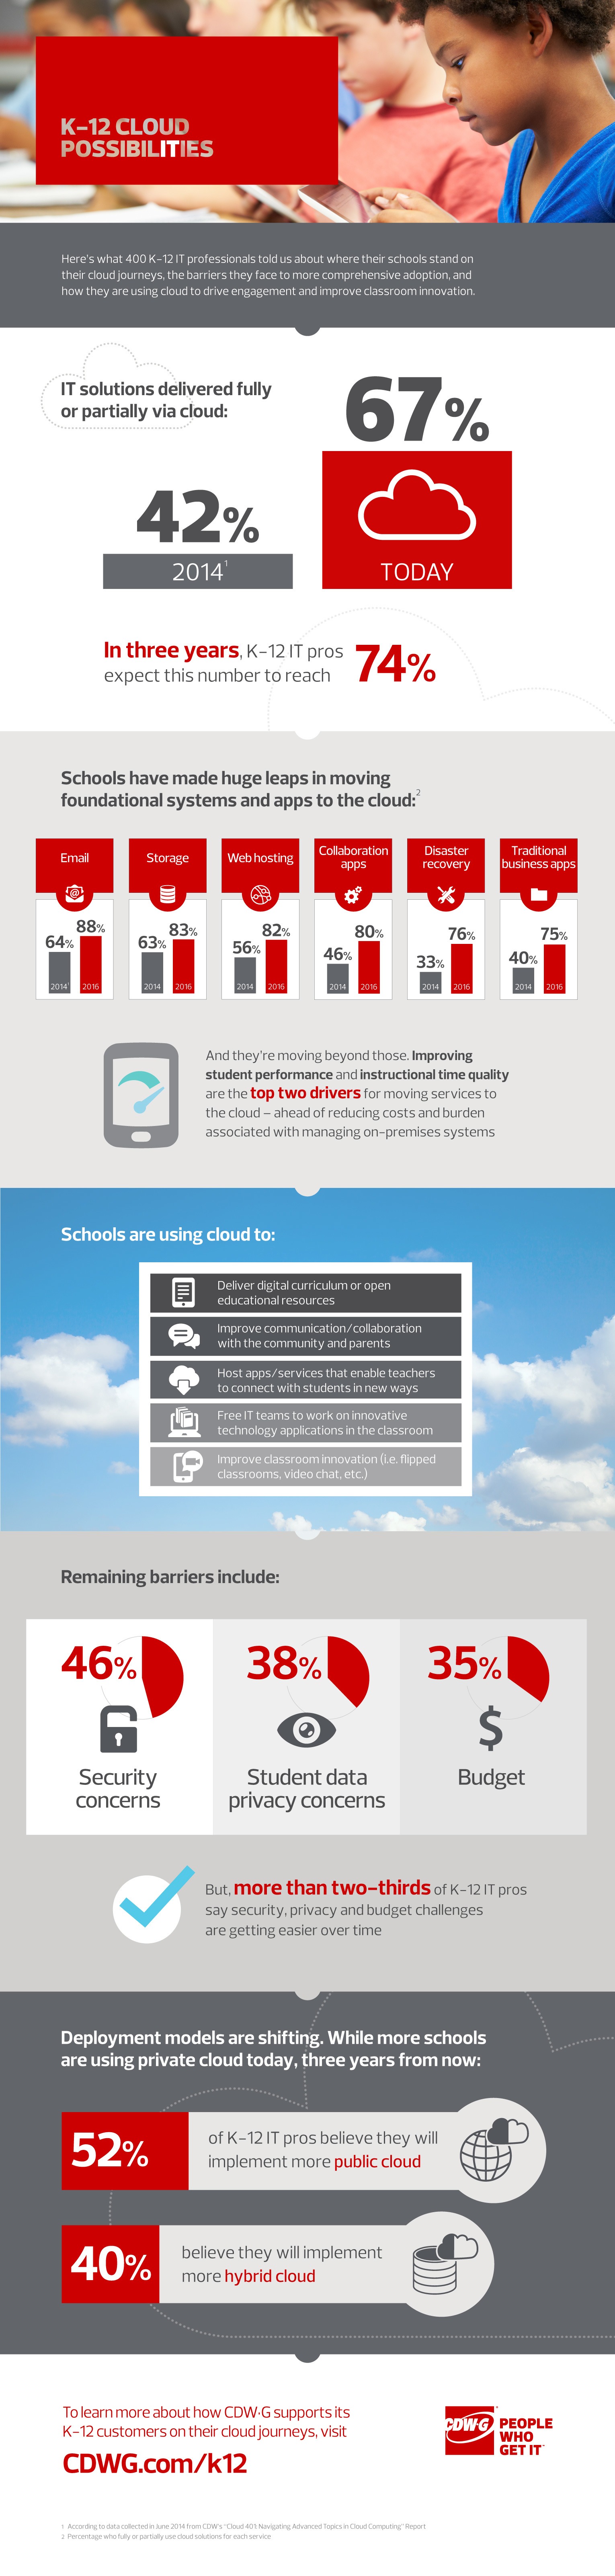 K12 Cloud Possibilities Infographic